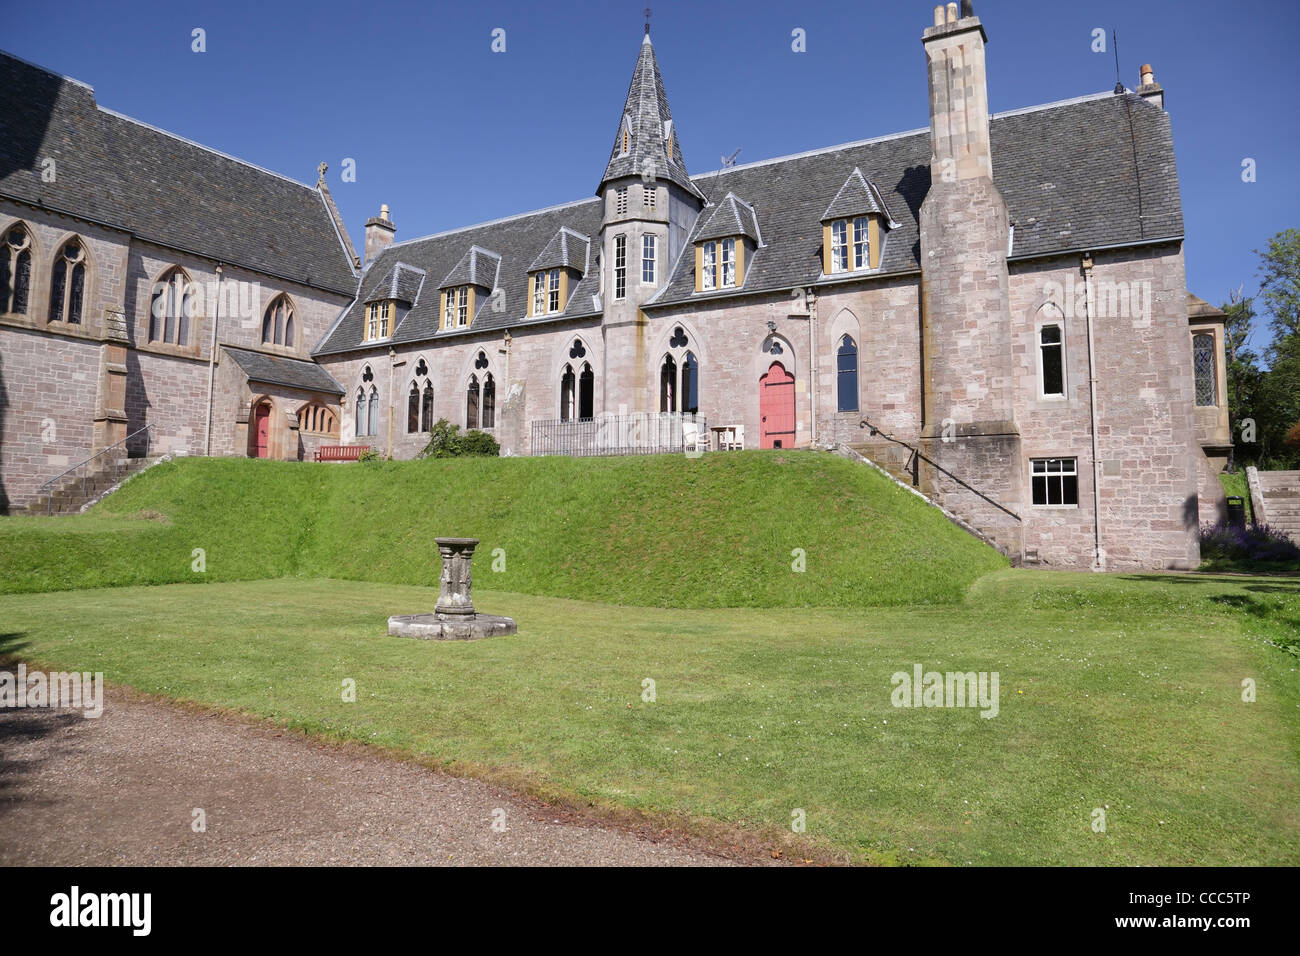 The College Building at the Cathedral of The Isles in Millport on the Island of Great Cumbrae, Ayrshire, Scotland, UK Stock Photo